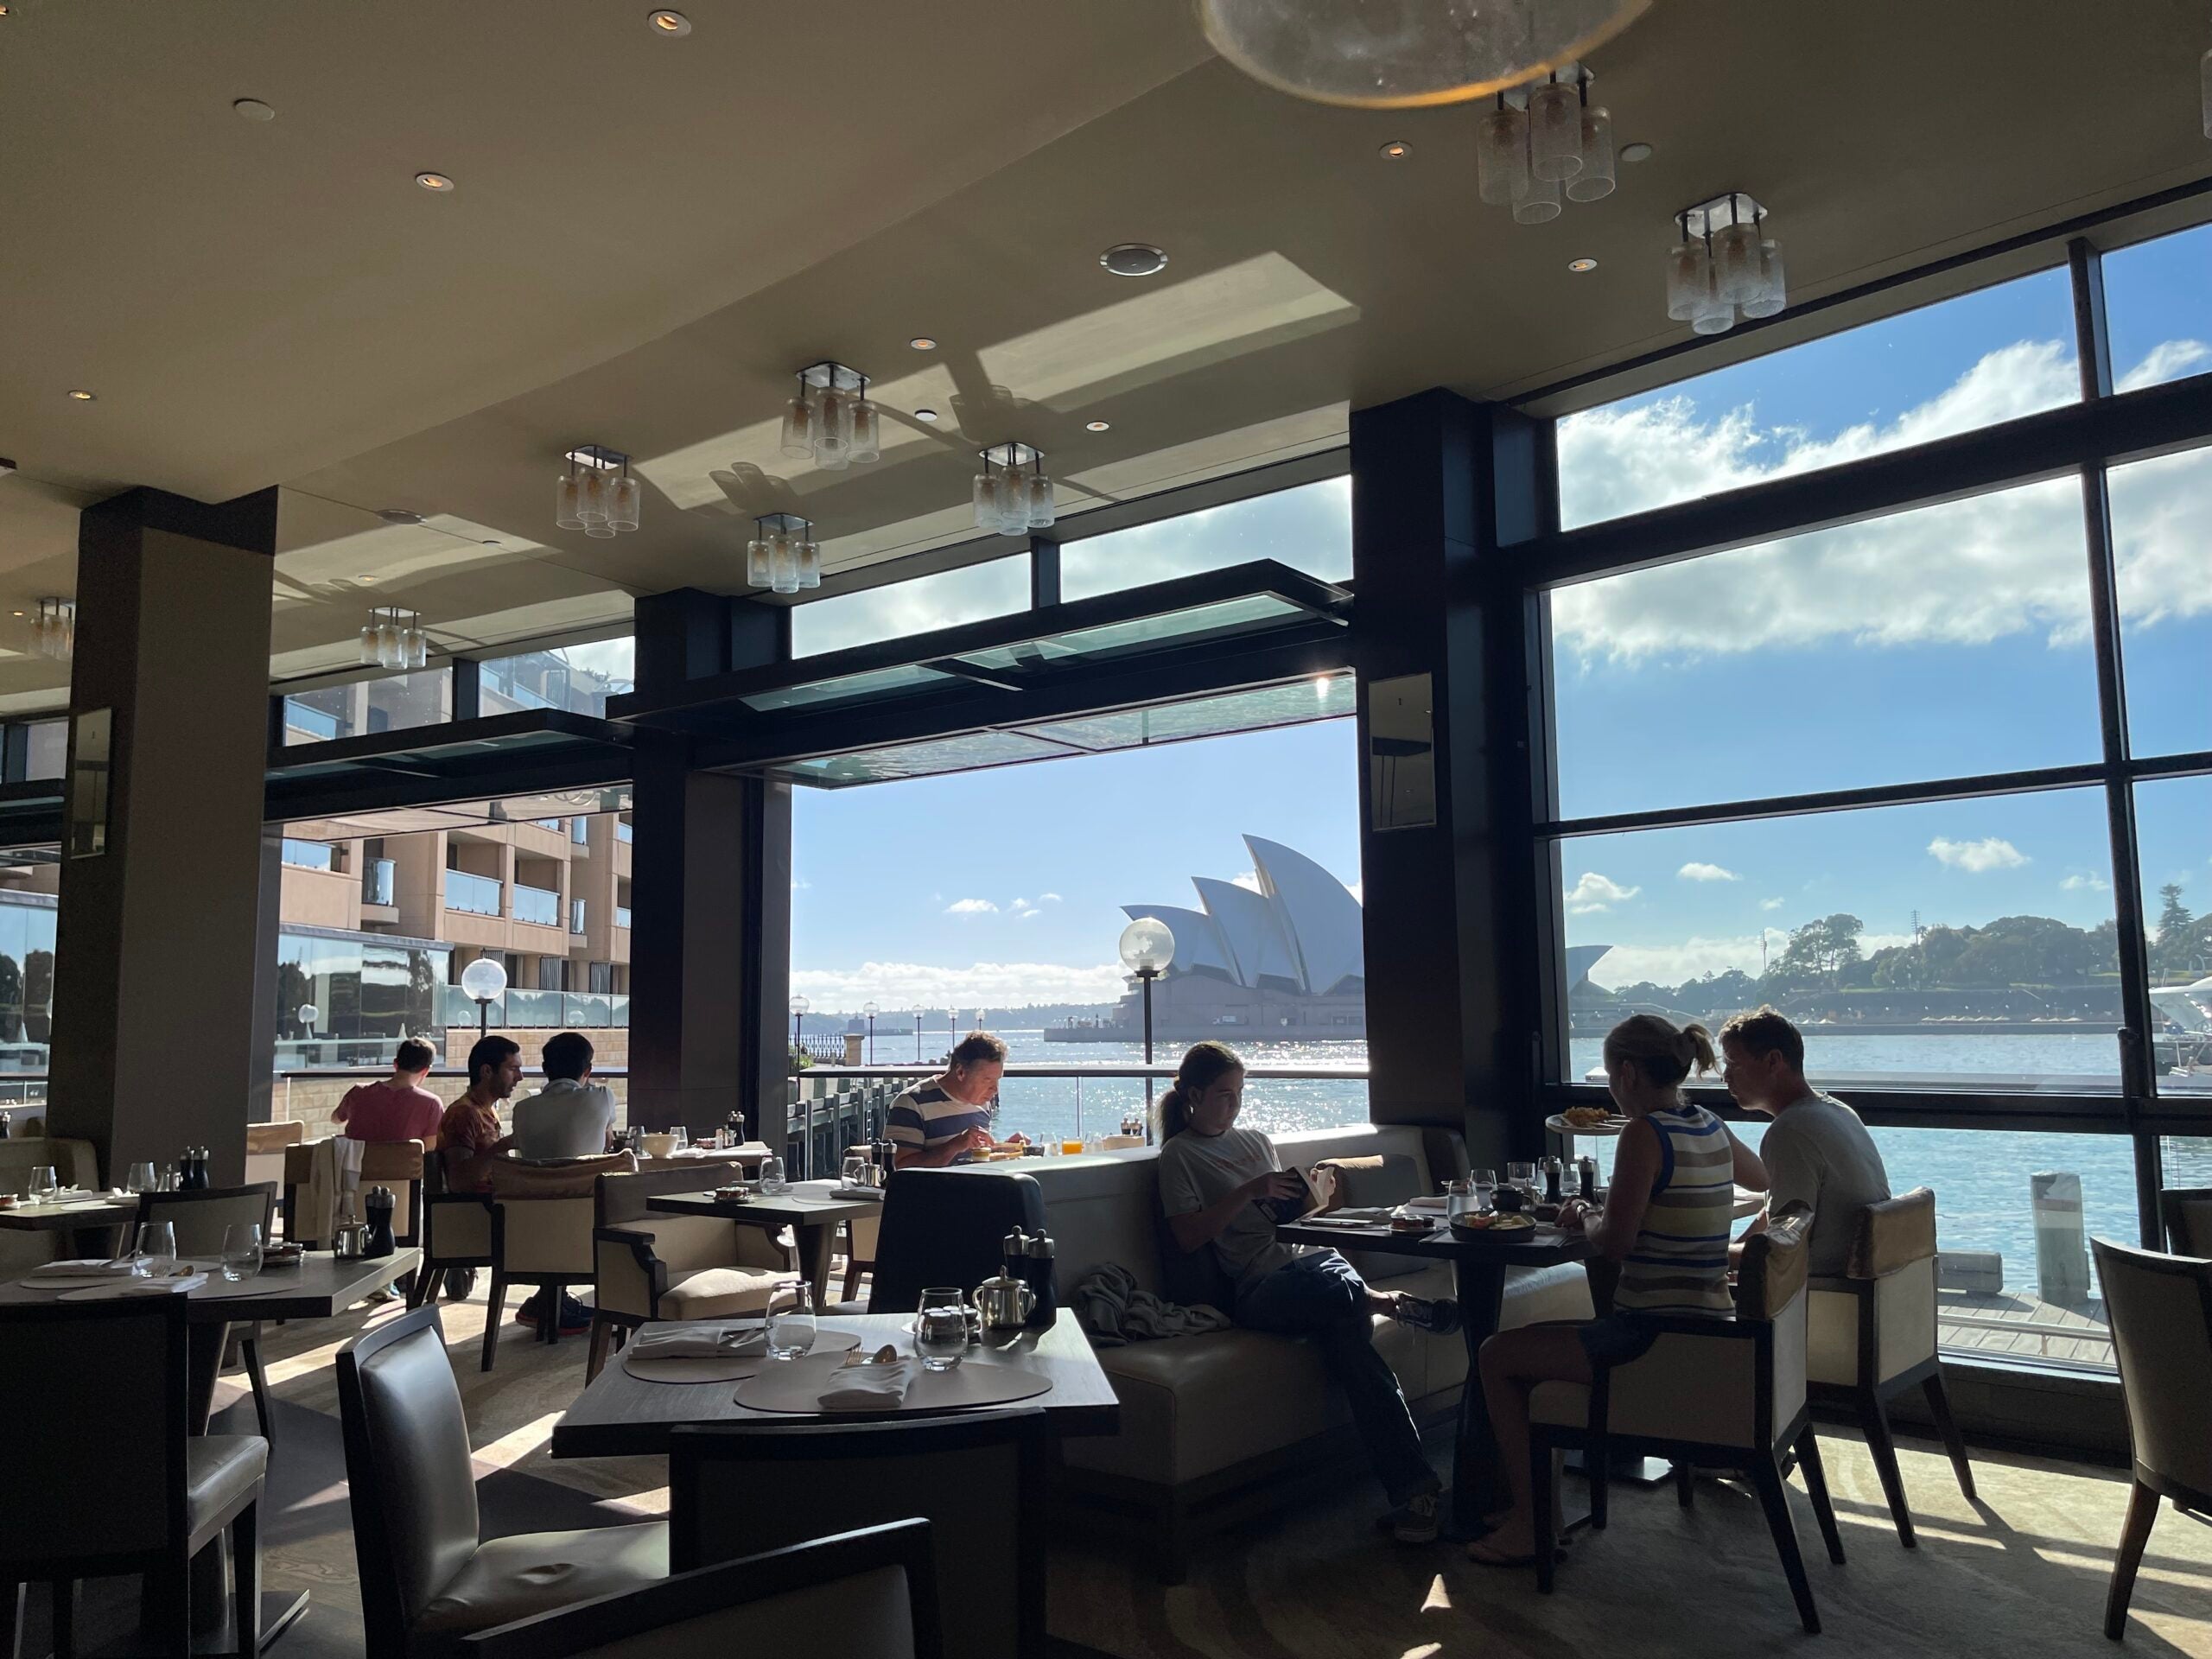 The ultimate guide to cruise ship food and dining - The Points Guy